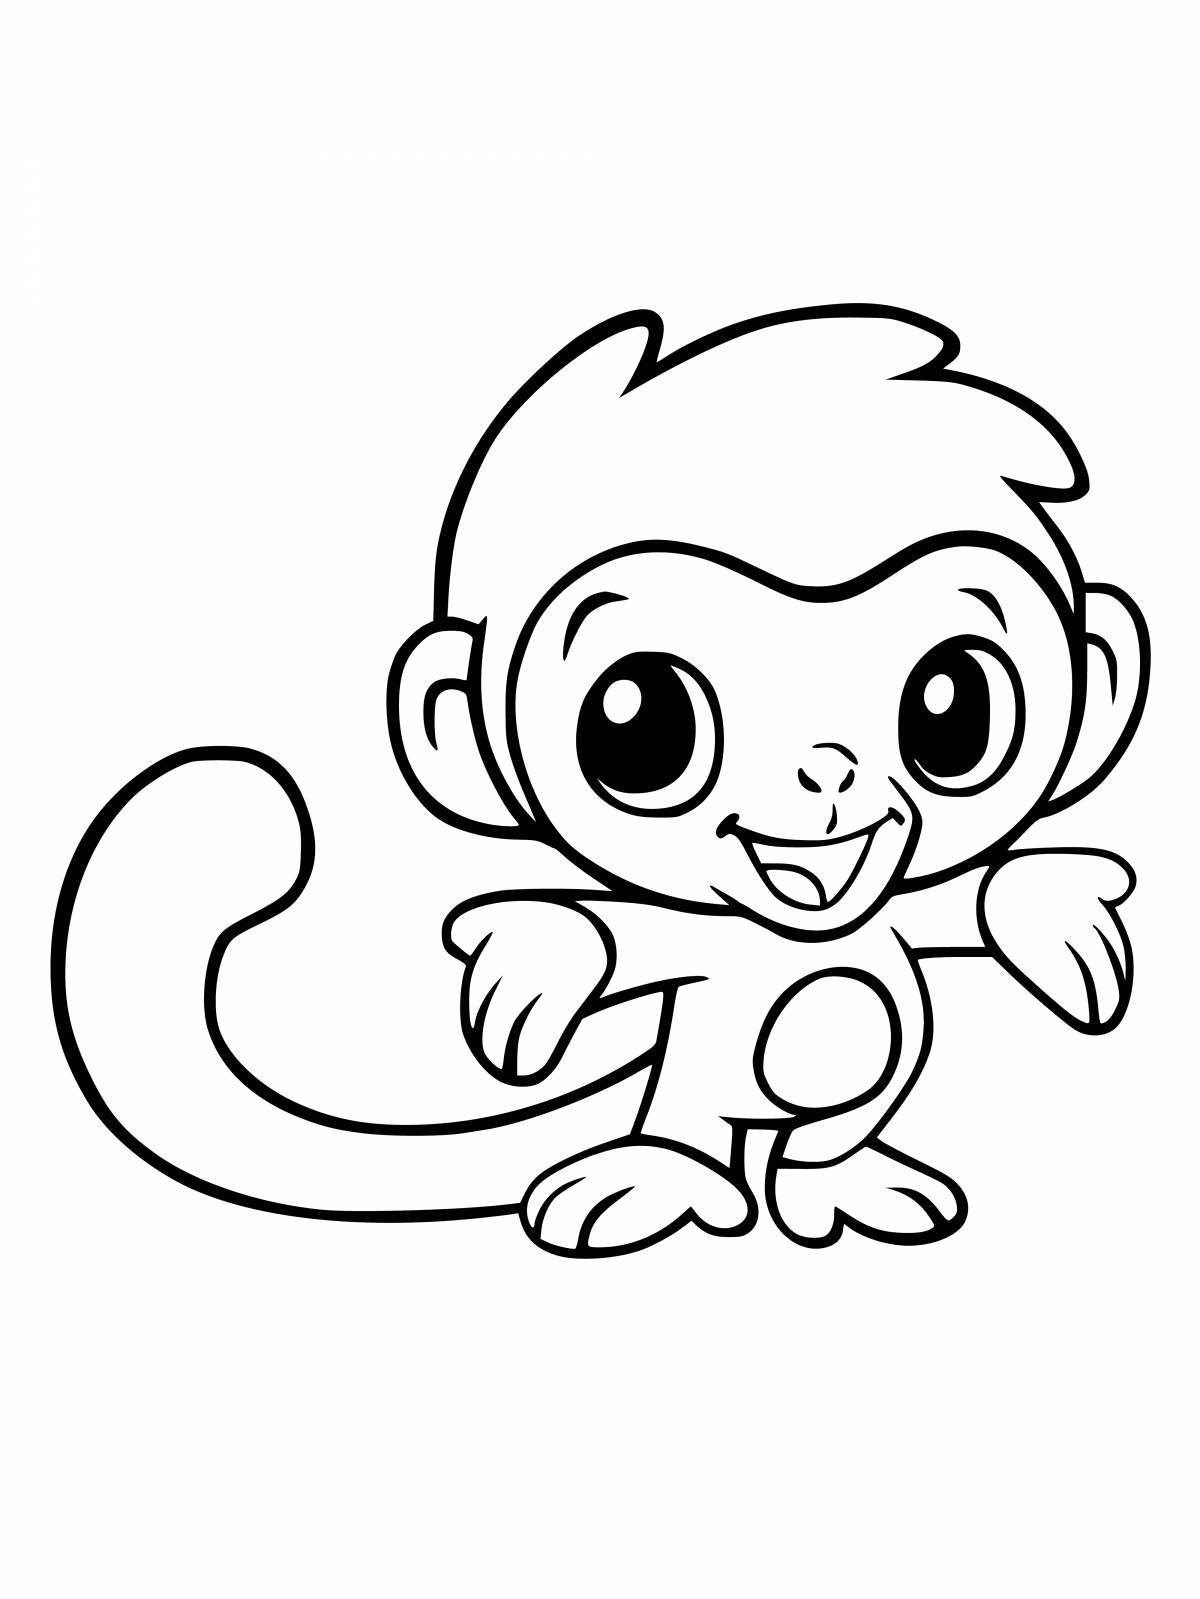 Smiling monkey coloring book